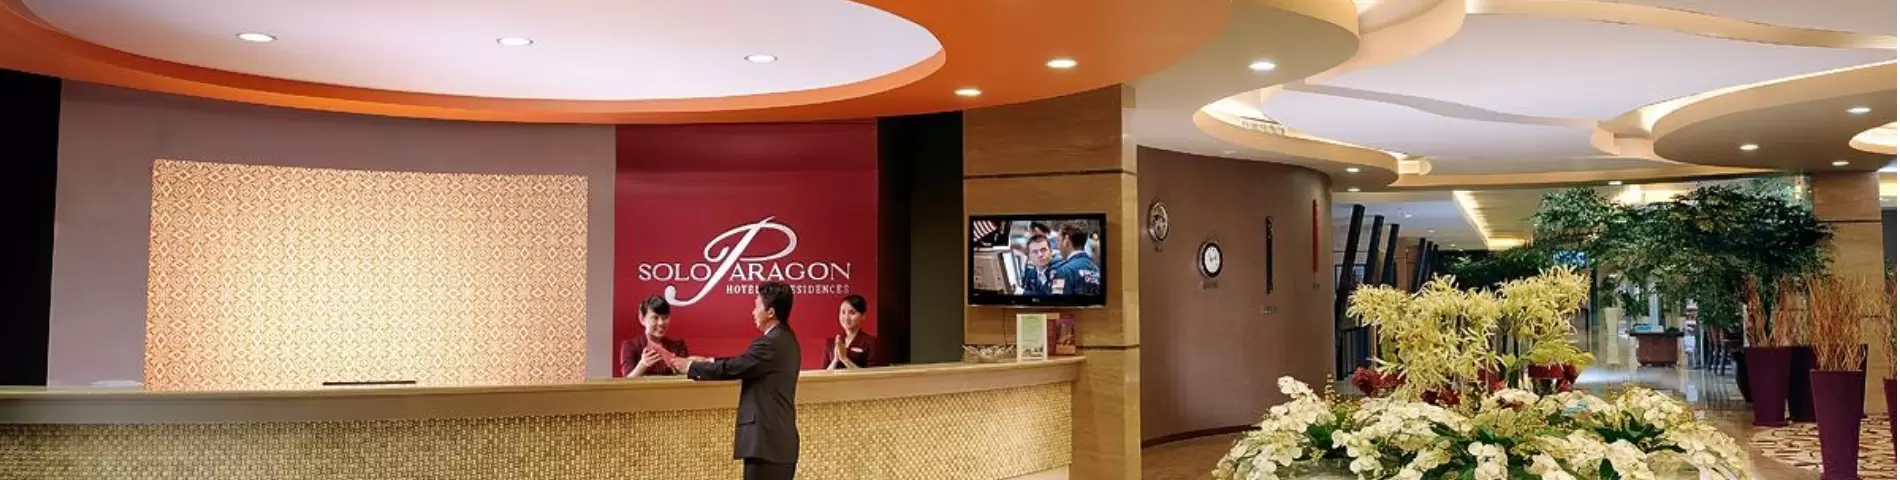 Solo Paragon Hotel and Residences